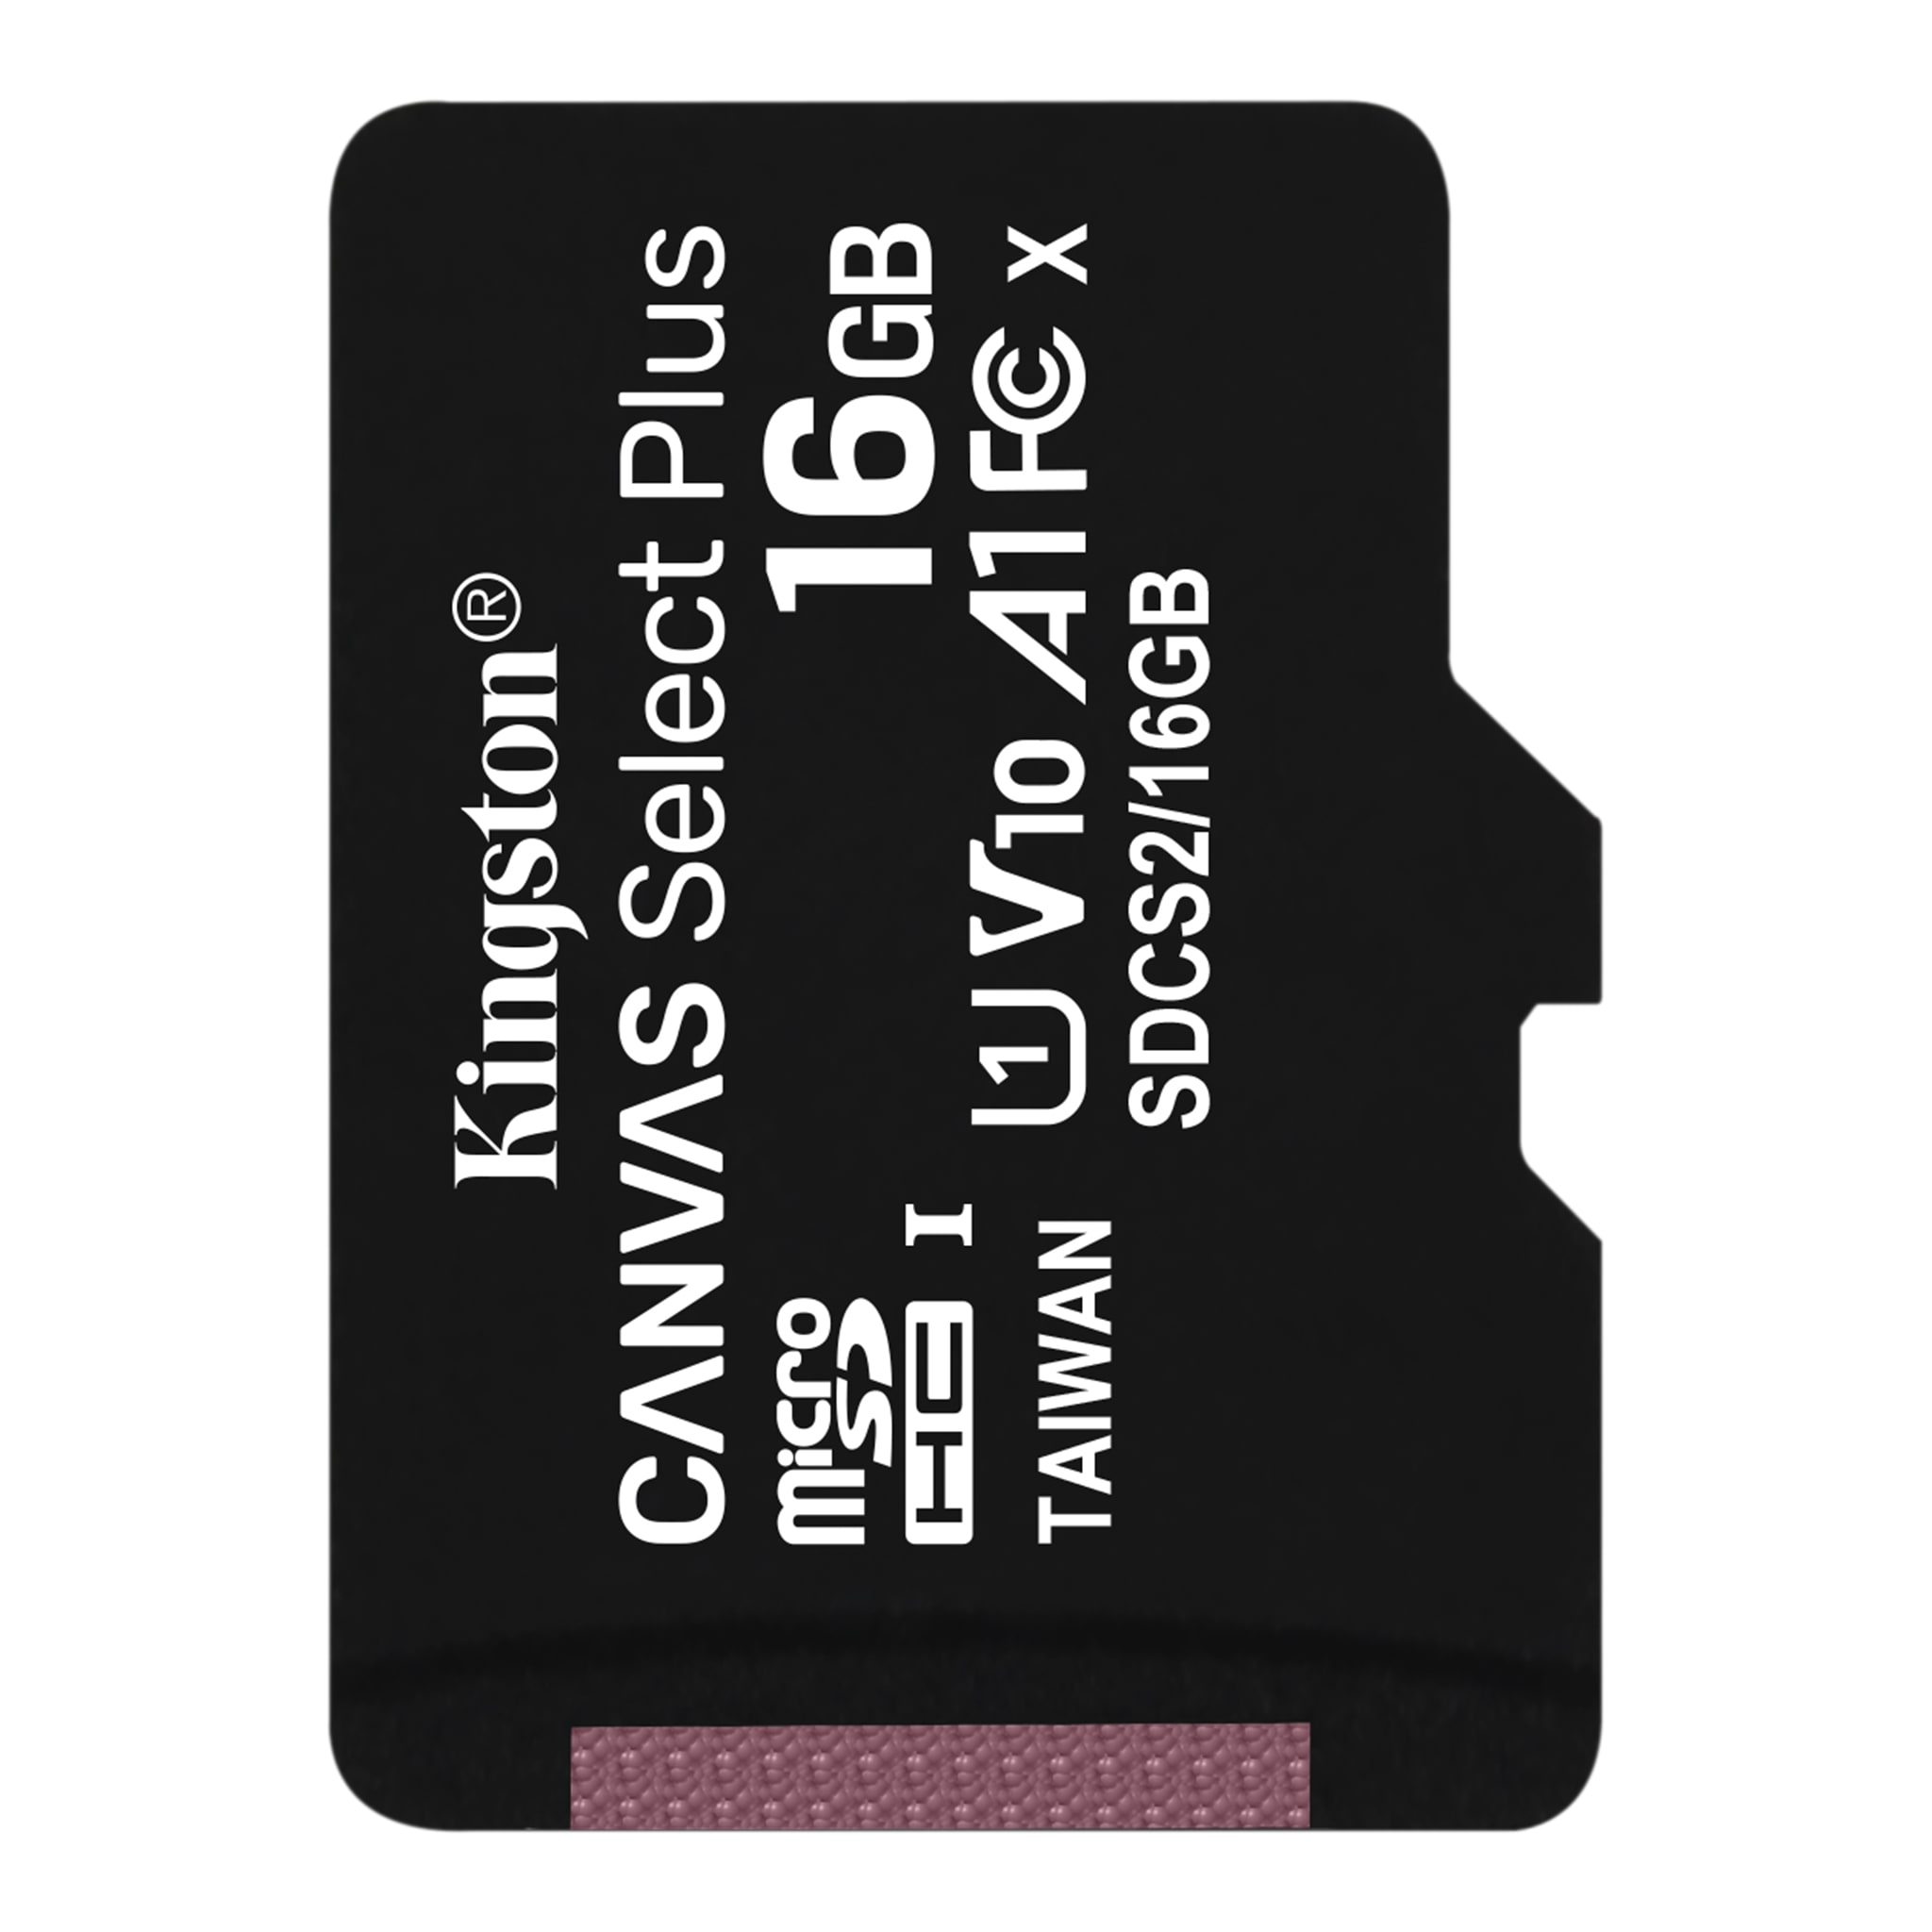 Kingston 32GB Spice Mobile Mi-430 MicroSDHC Canvas Select Plus Card Verified by SanFlash. 100MBs Works with Kingston 